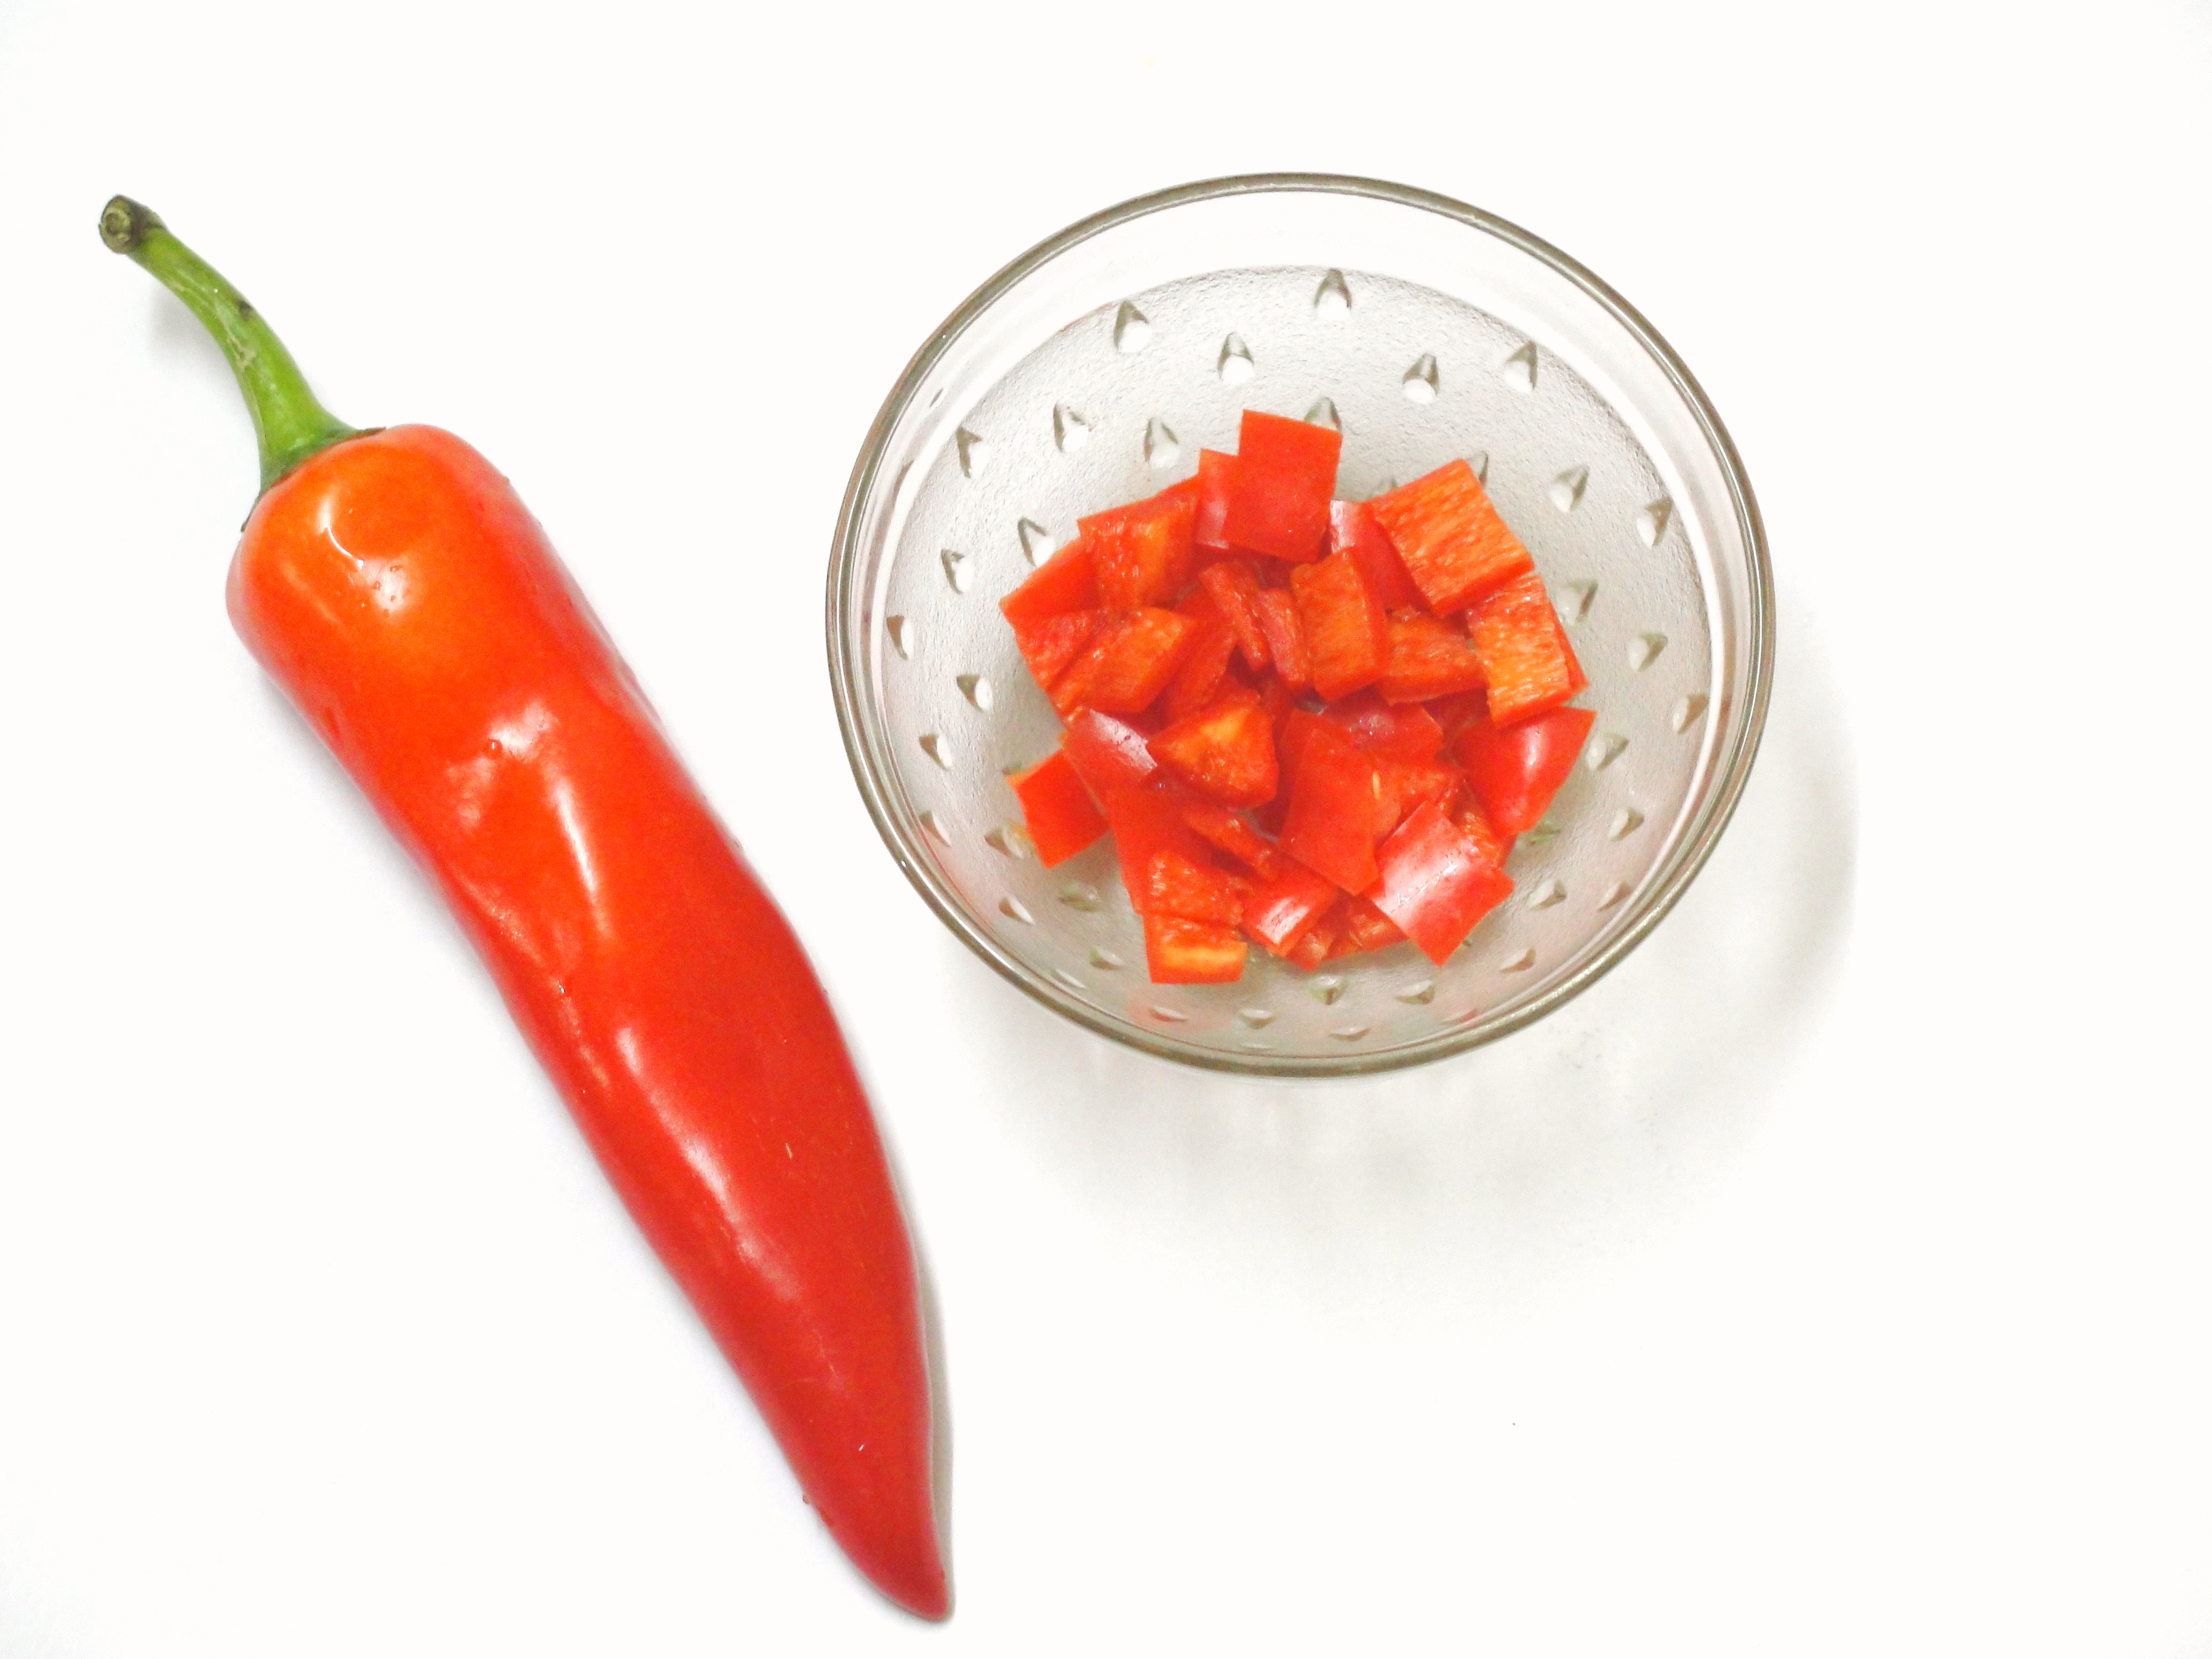 How to Dice Chili Peppers: 6 Steps (with Pictures) - wikiHow